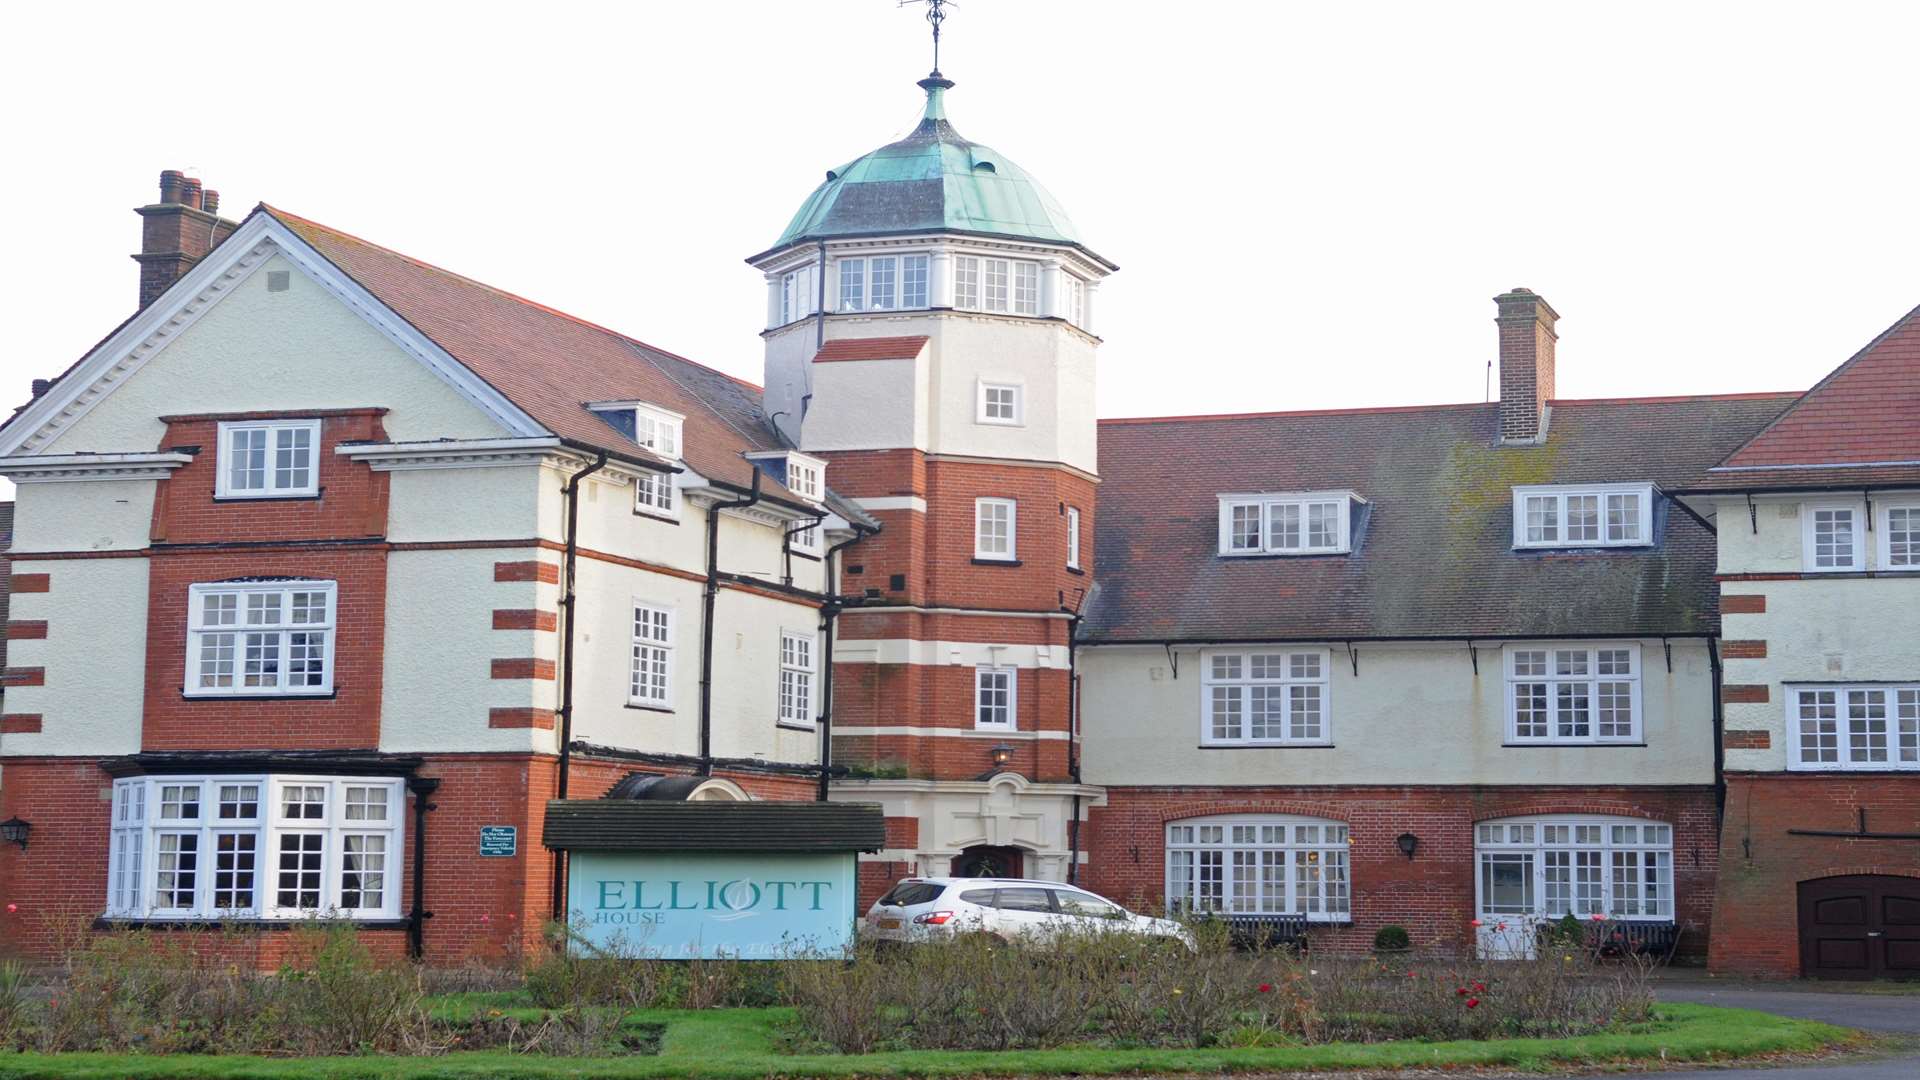 Elliott House in Herne Bay has had a damning care home report